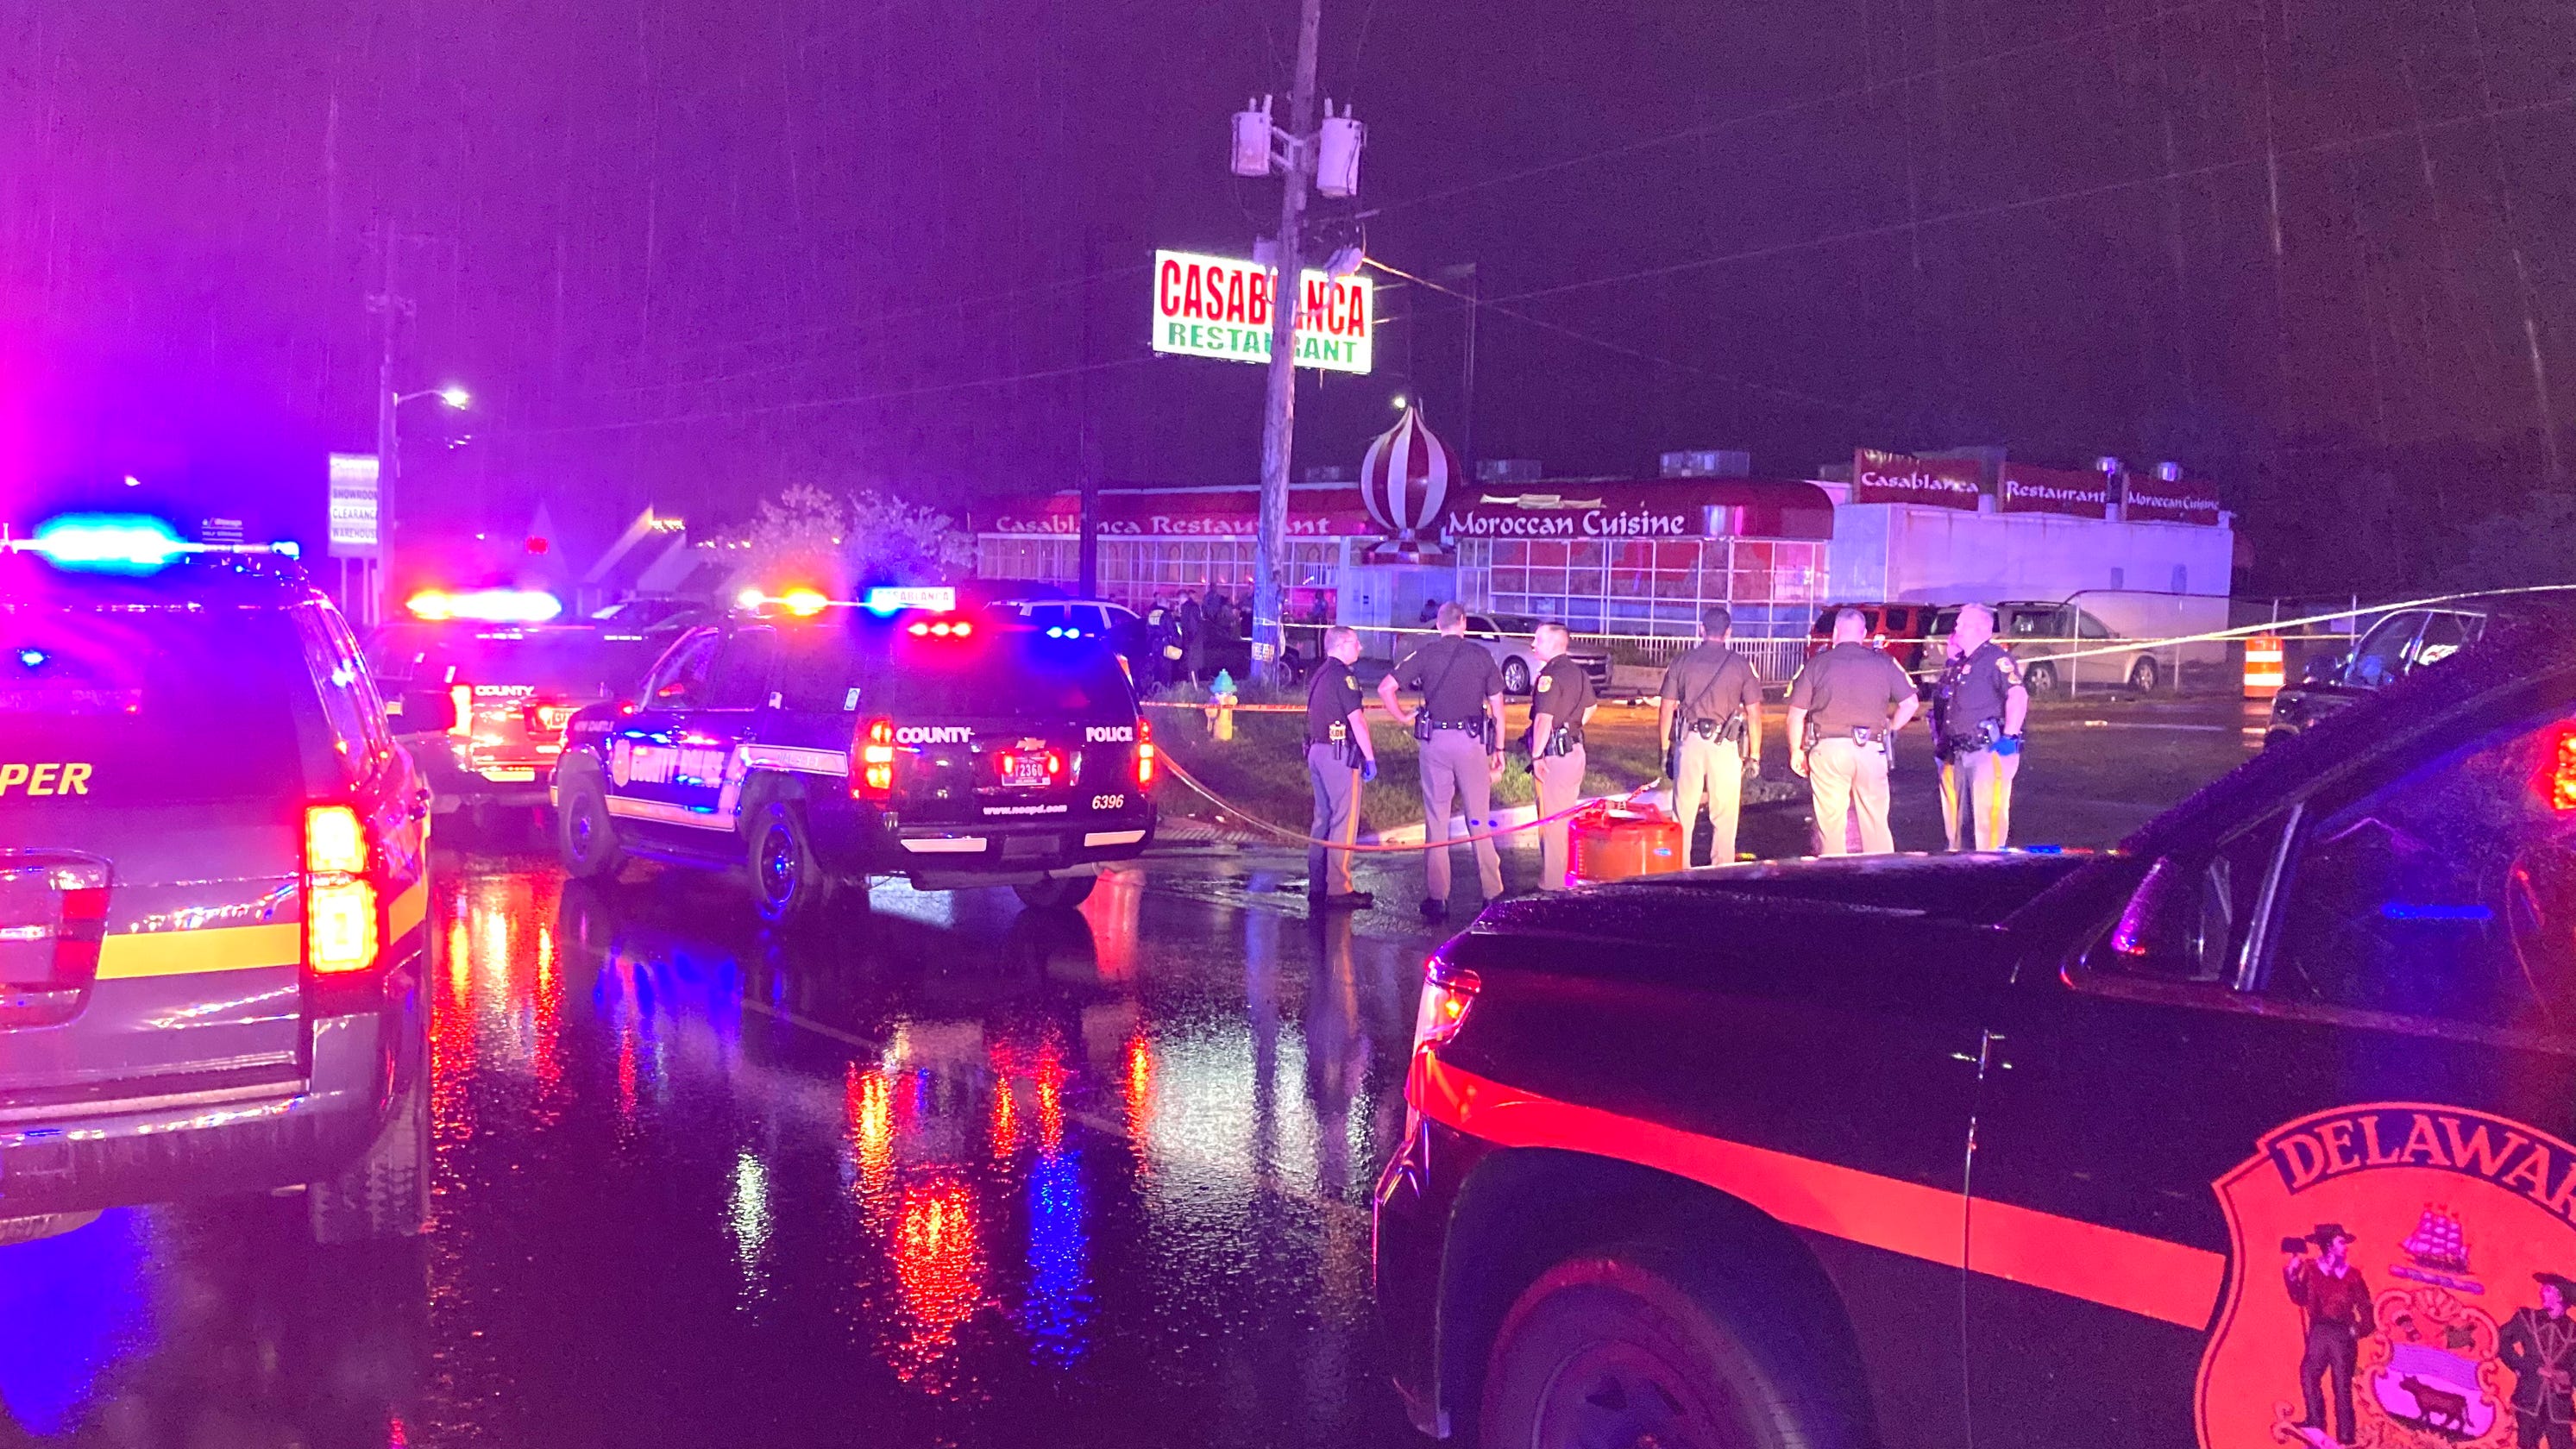 At least 1 dead in shooting outside restaurant near New Castle